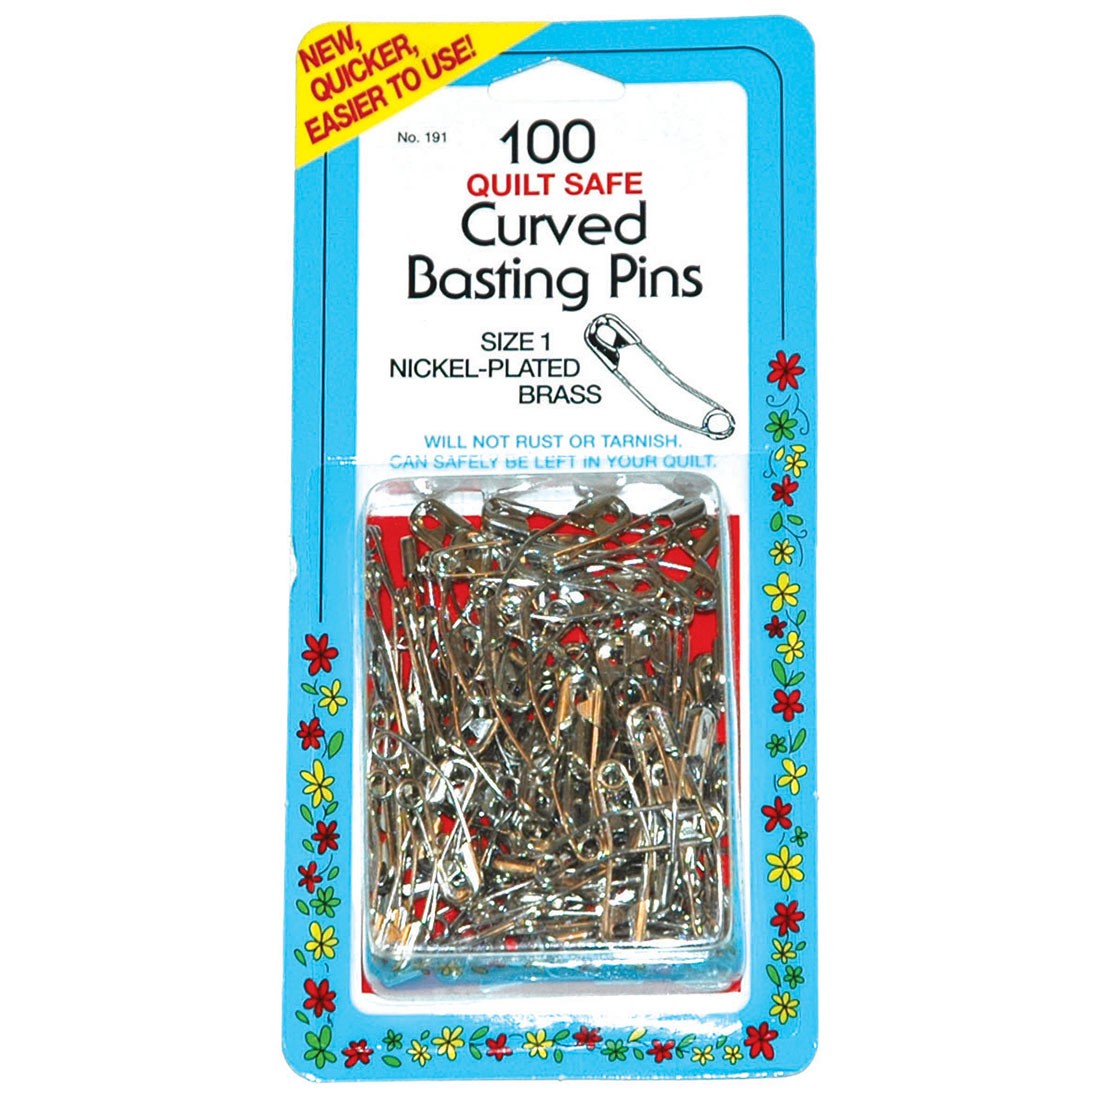 Curved Basting Pins, Size No. 1